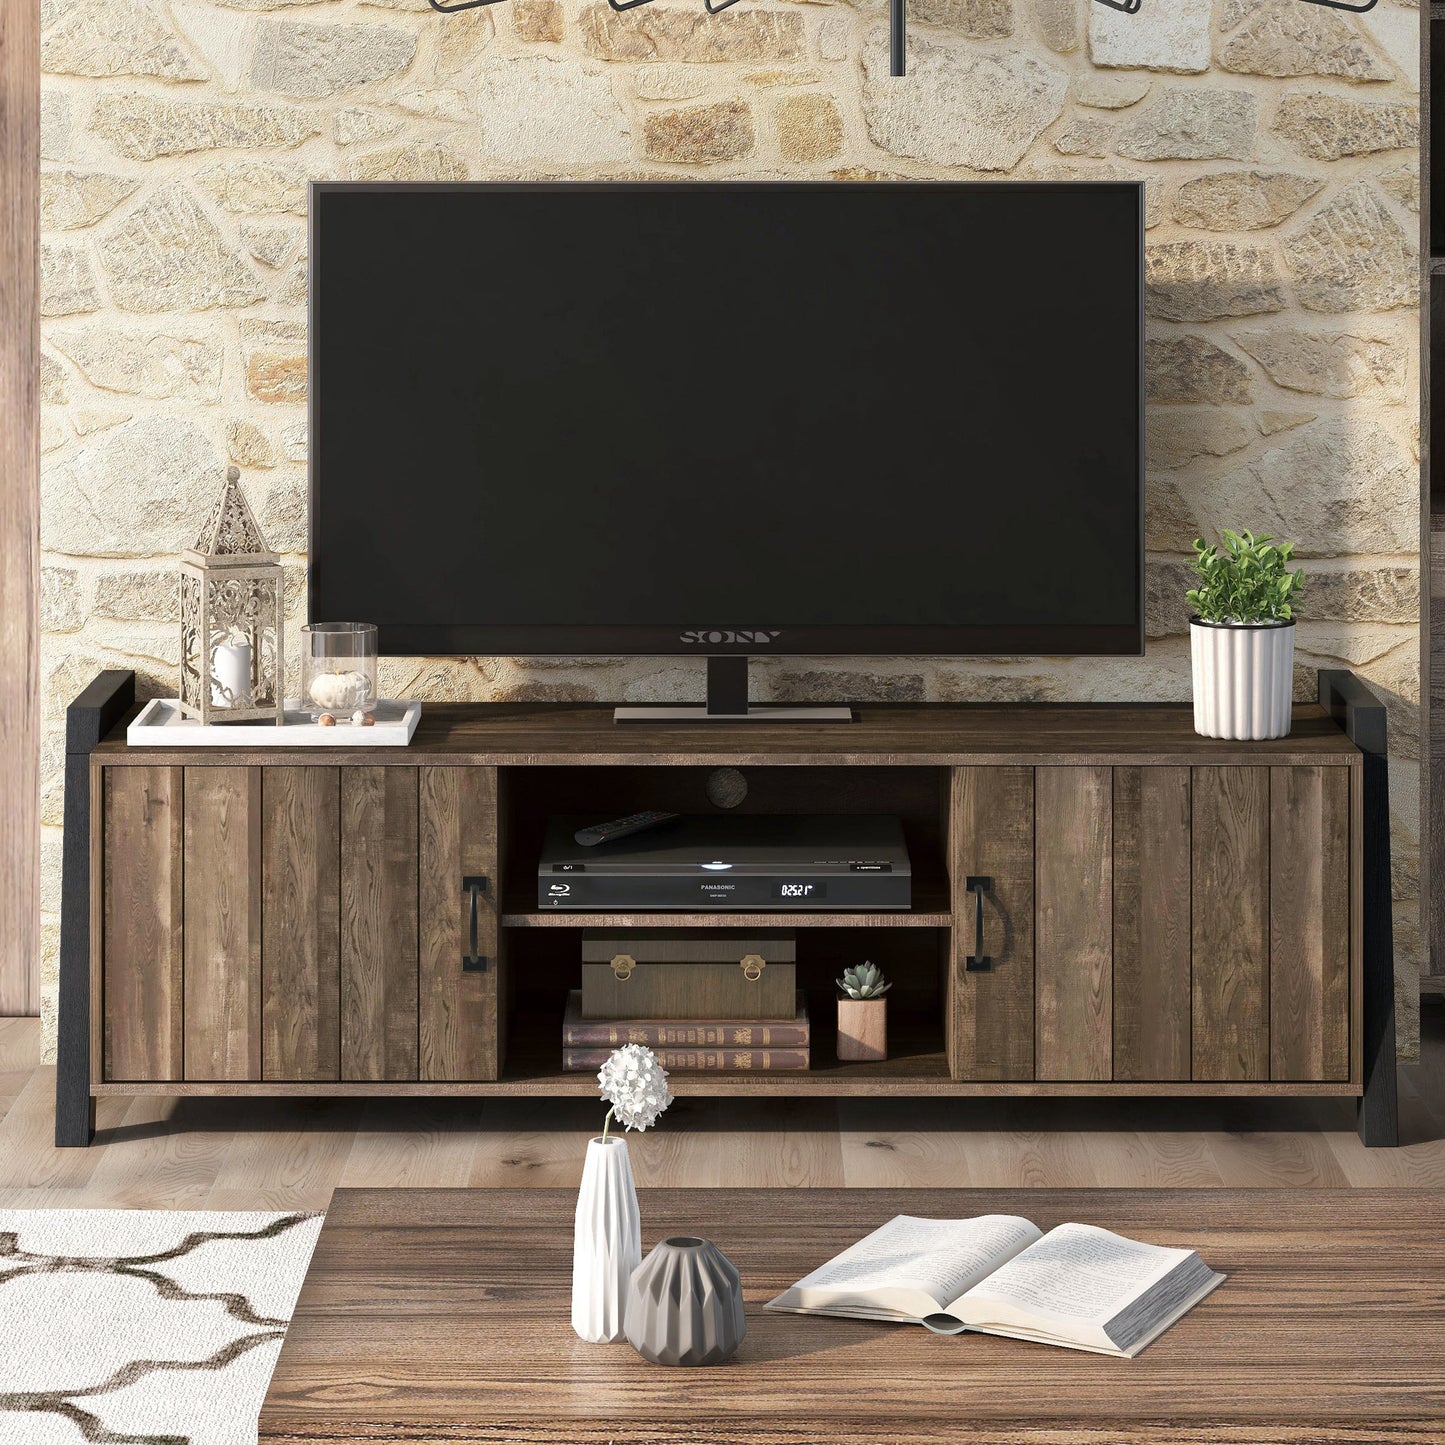 Front-facing farmhouse reclaimed oak and black six-shelf TV stand in a living room with accessories